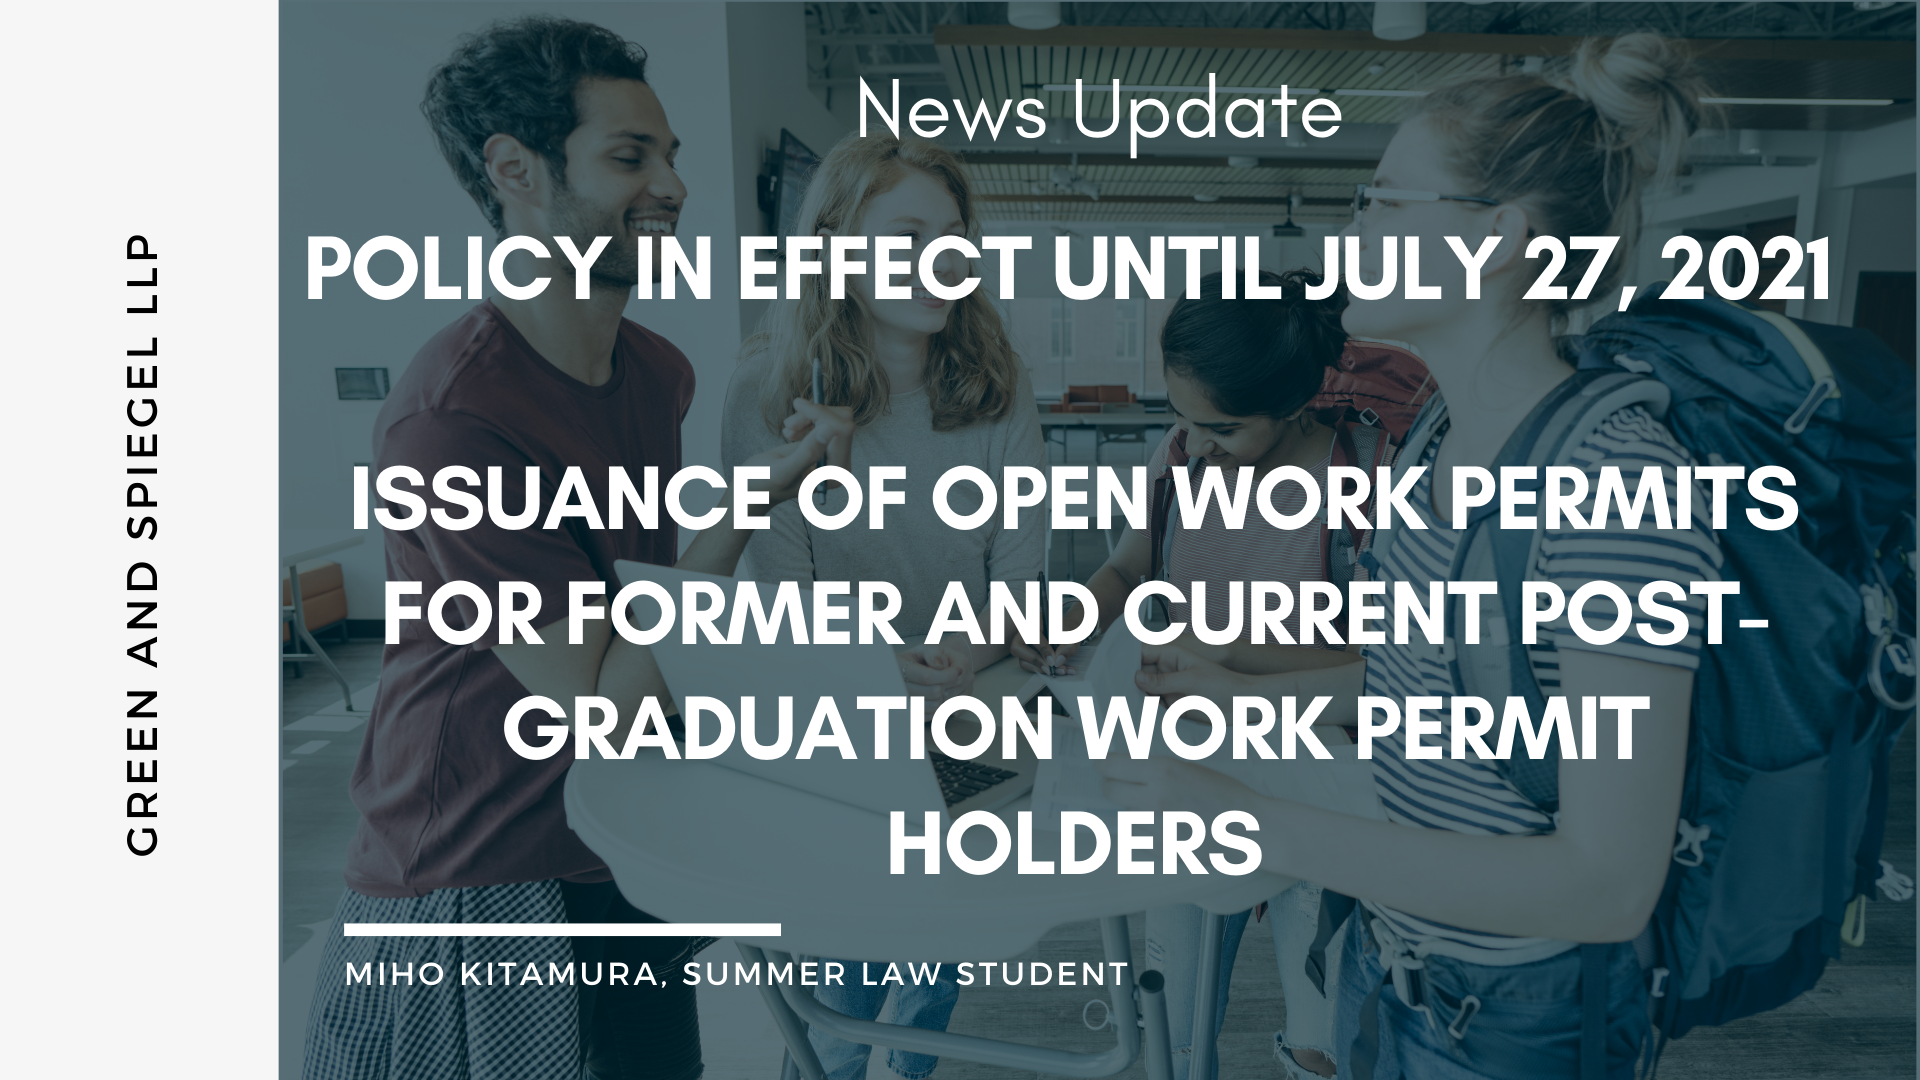 POLICY IN EFFECT UNTIL JULY 27, 2021 – ISSUANCE OF OPEN WORK PERMITS FOR FORMER AND CURRENT POST-GRADUATION WORK PERMIT HOLDERS